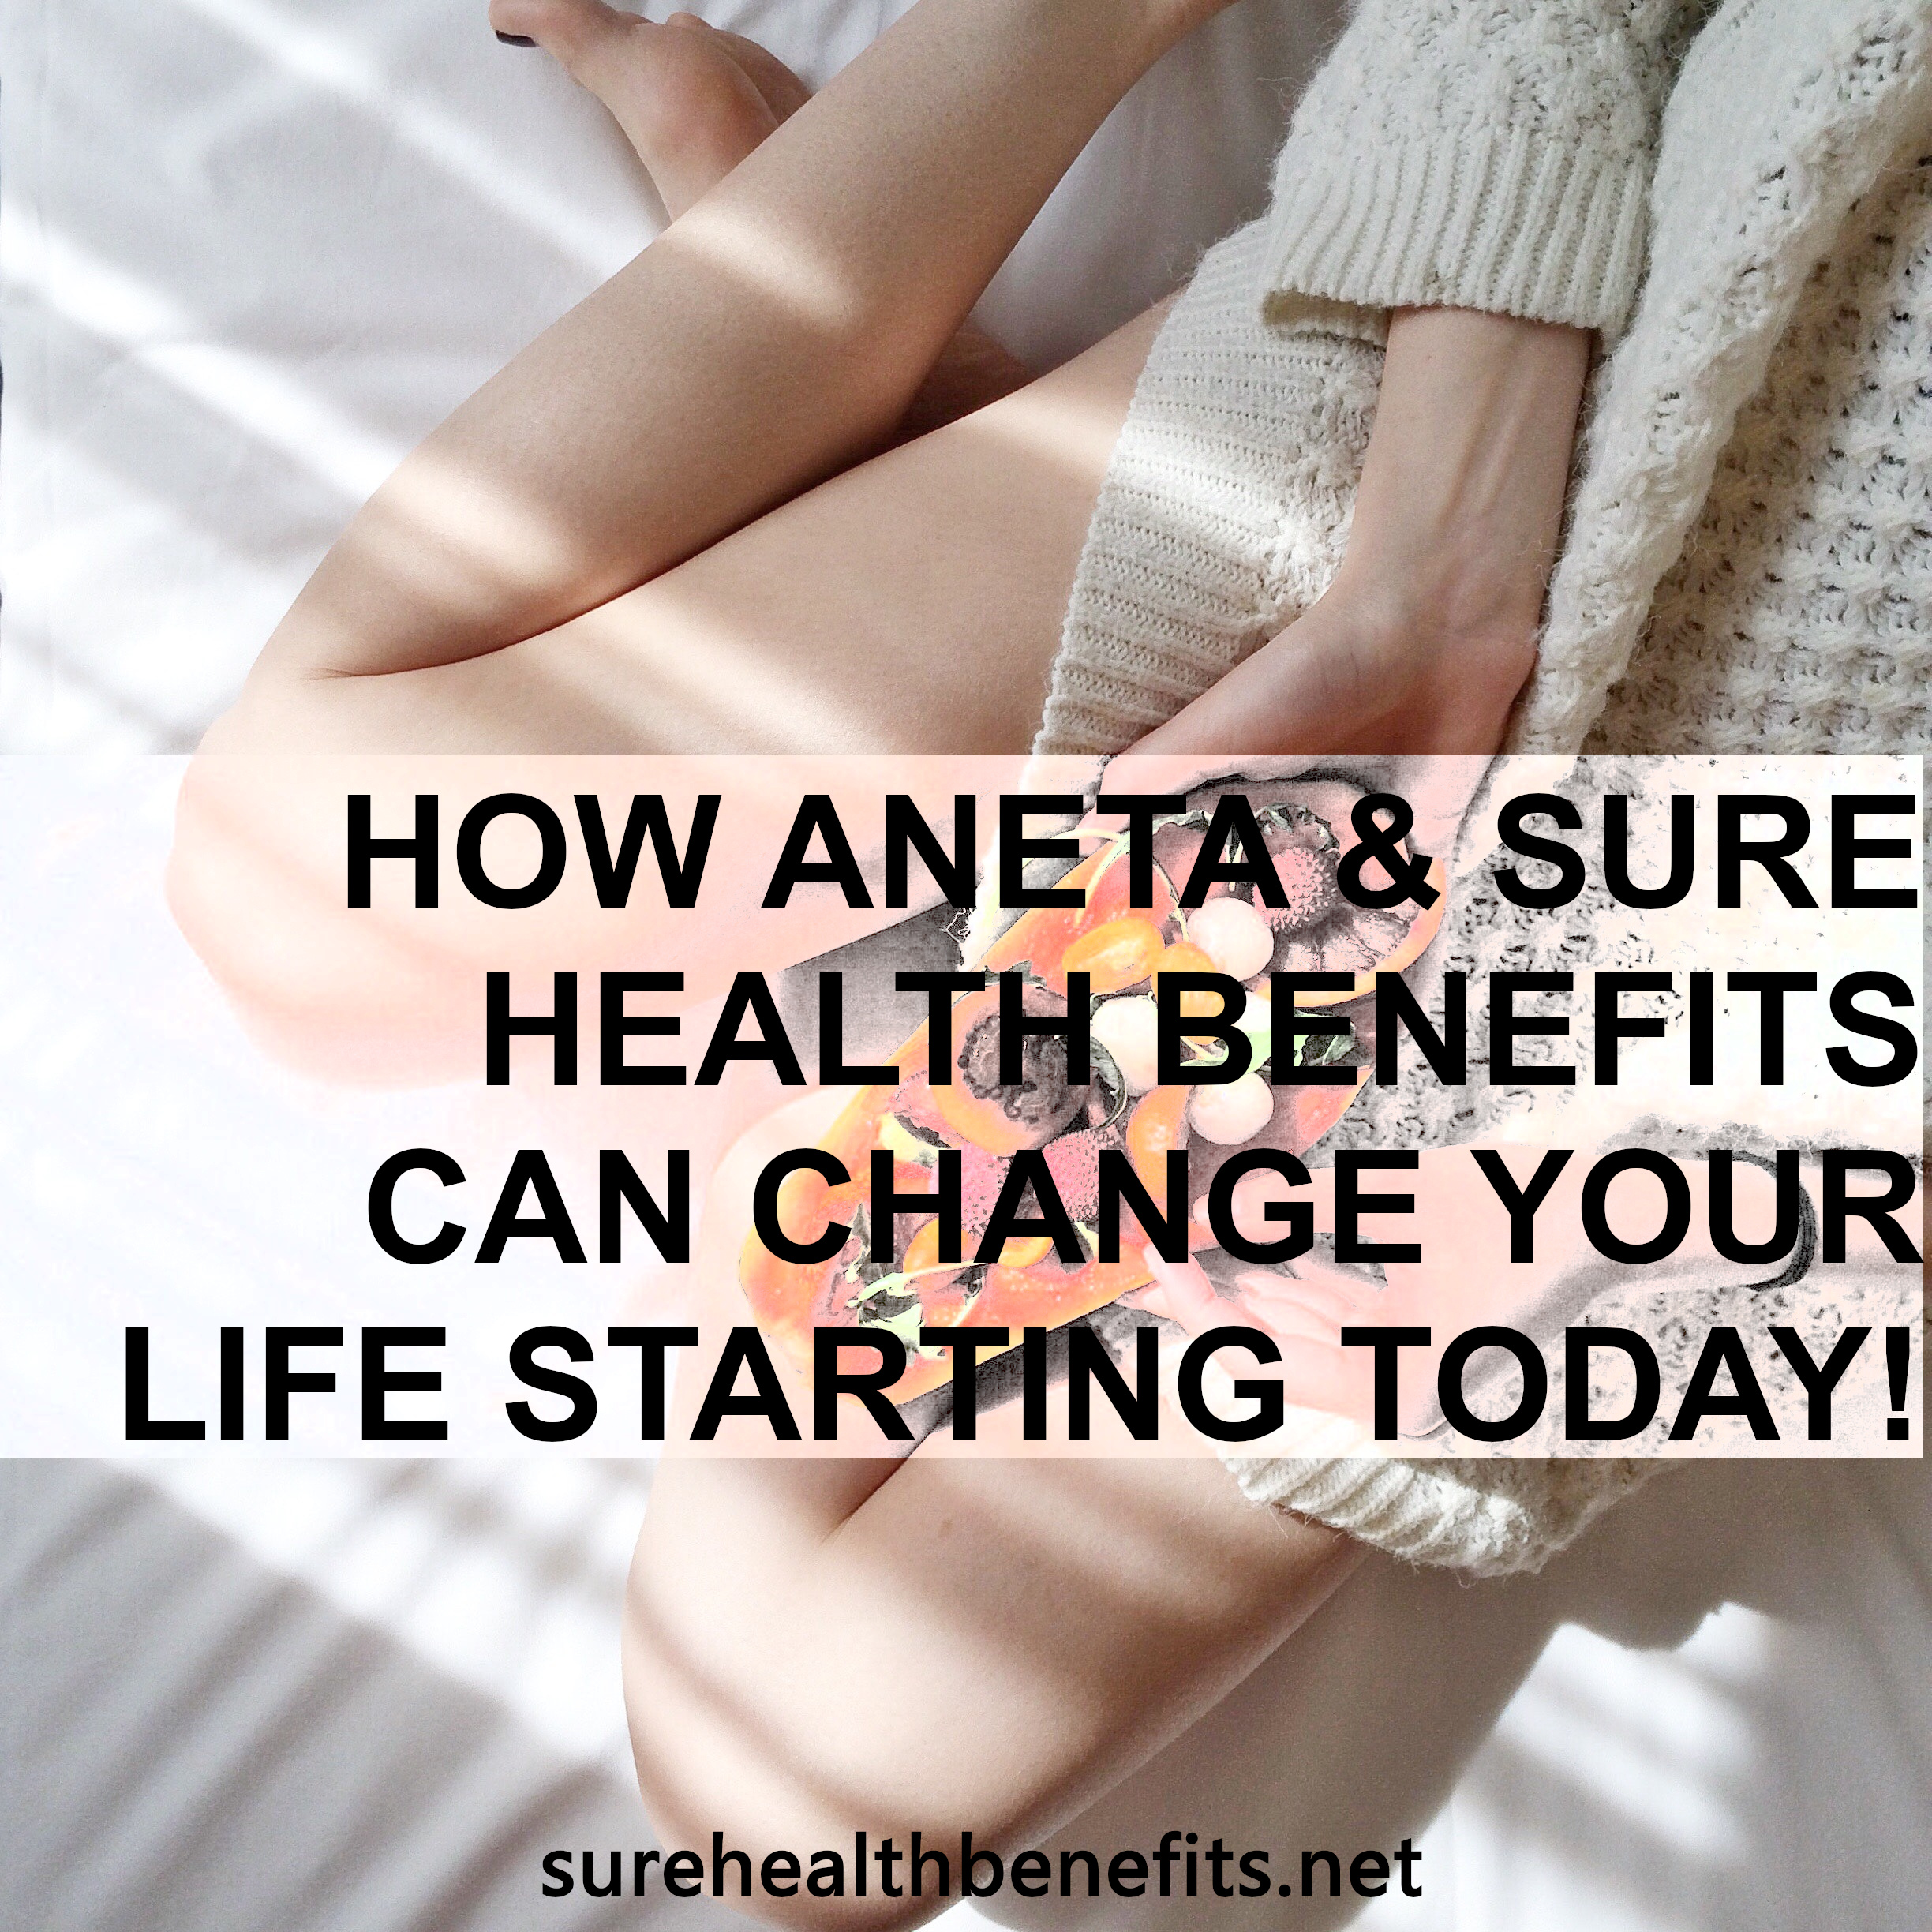 How Aneta and sure health benefits can positively change your life